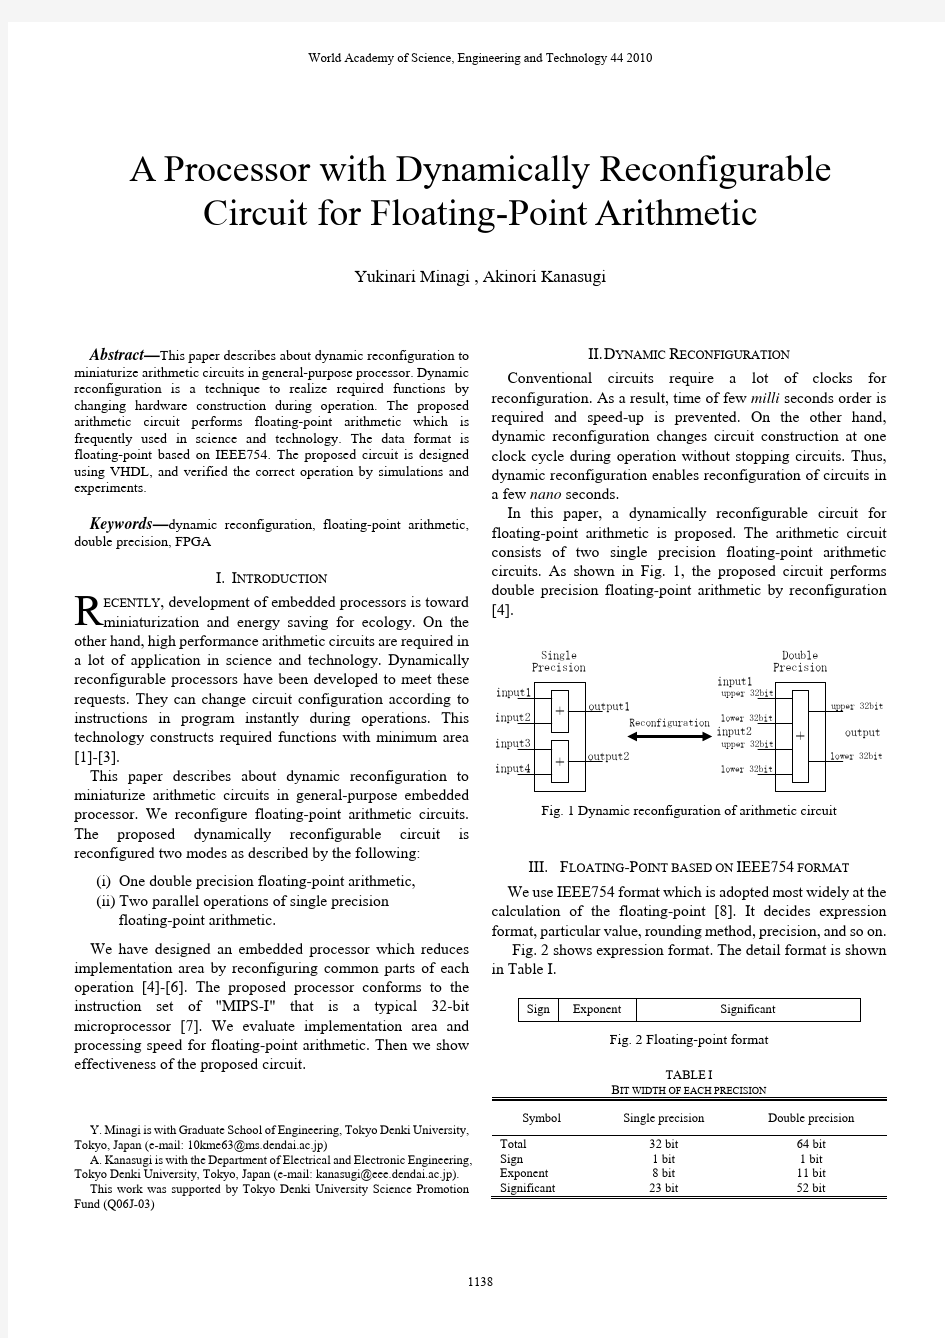 A Processor with Dynamically Reconfigurable Circuit forFloating-Point Arithmetic